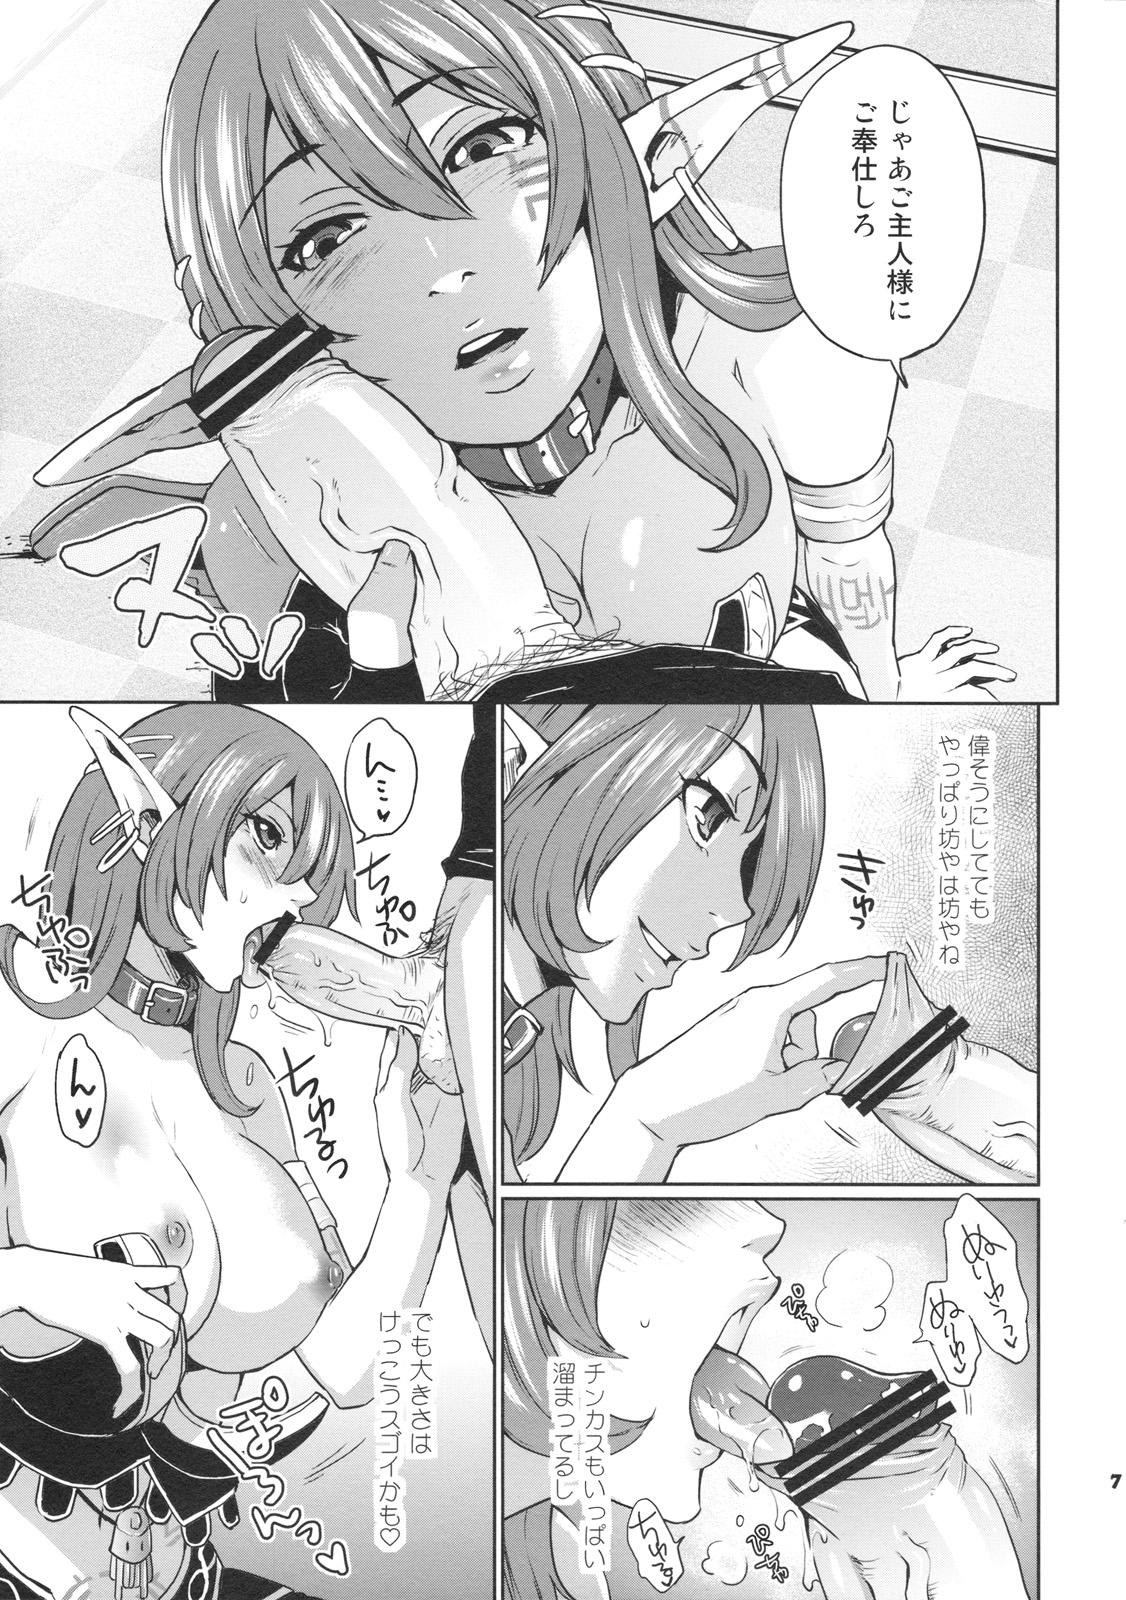 Wetpussy Hoshi no Umi no Miboujin - The Widow of The Star Ocean - Star ocean 4 Porn - Page 7